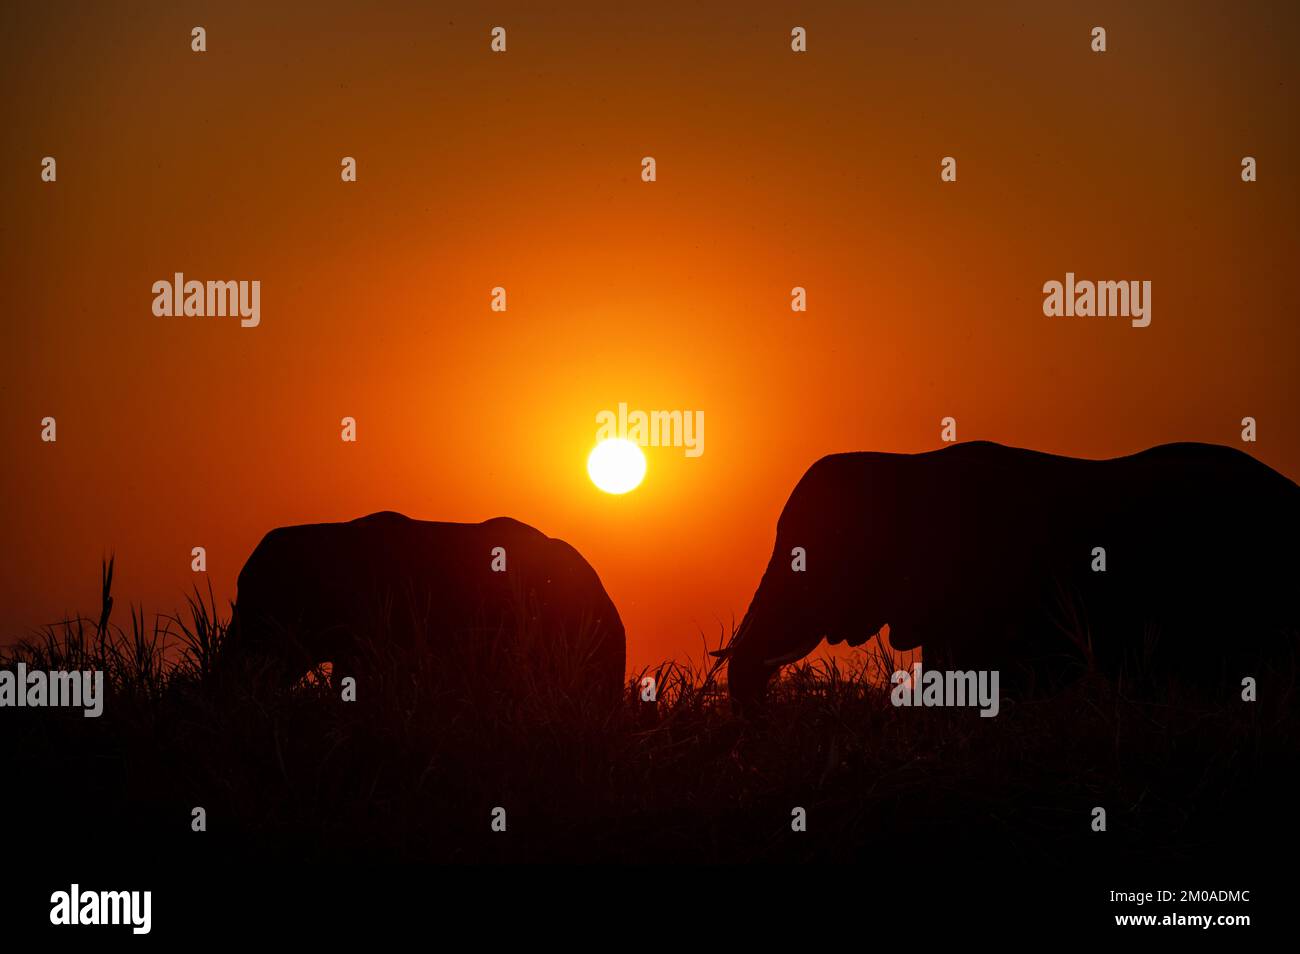 Silhouettes of two elephants set against a beautiful sunset in Chobe National Park in Botswana Stock Photo